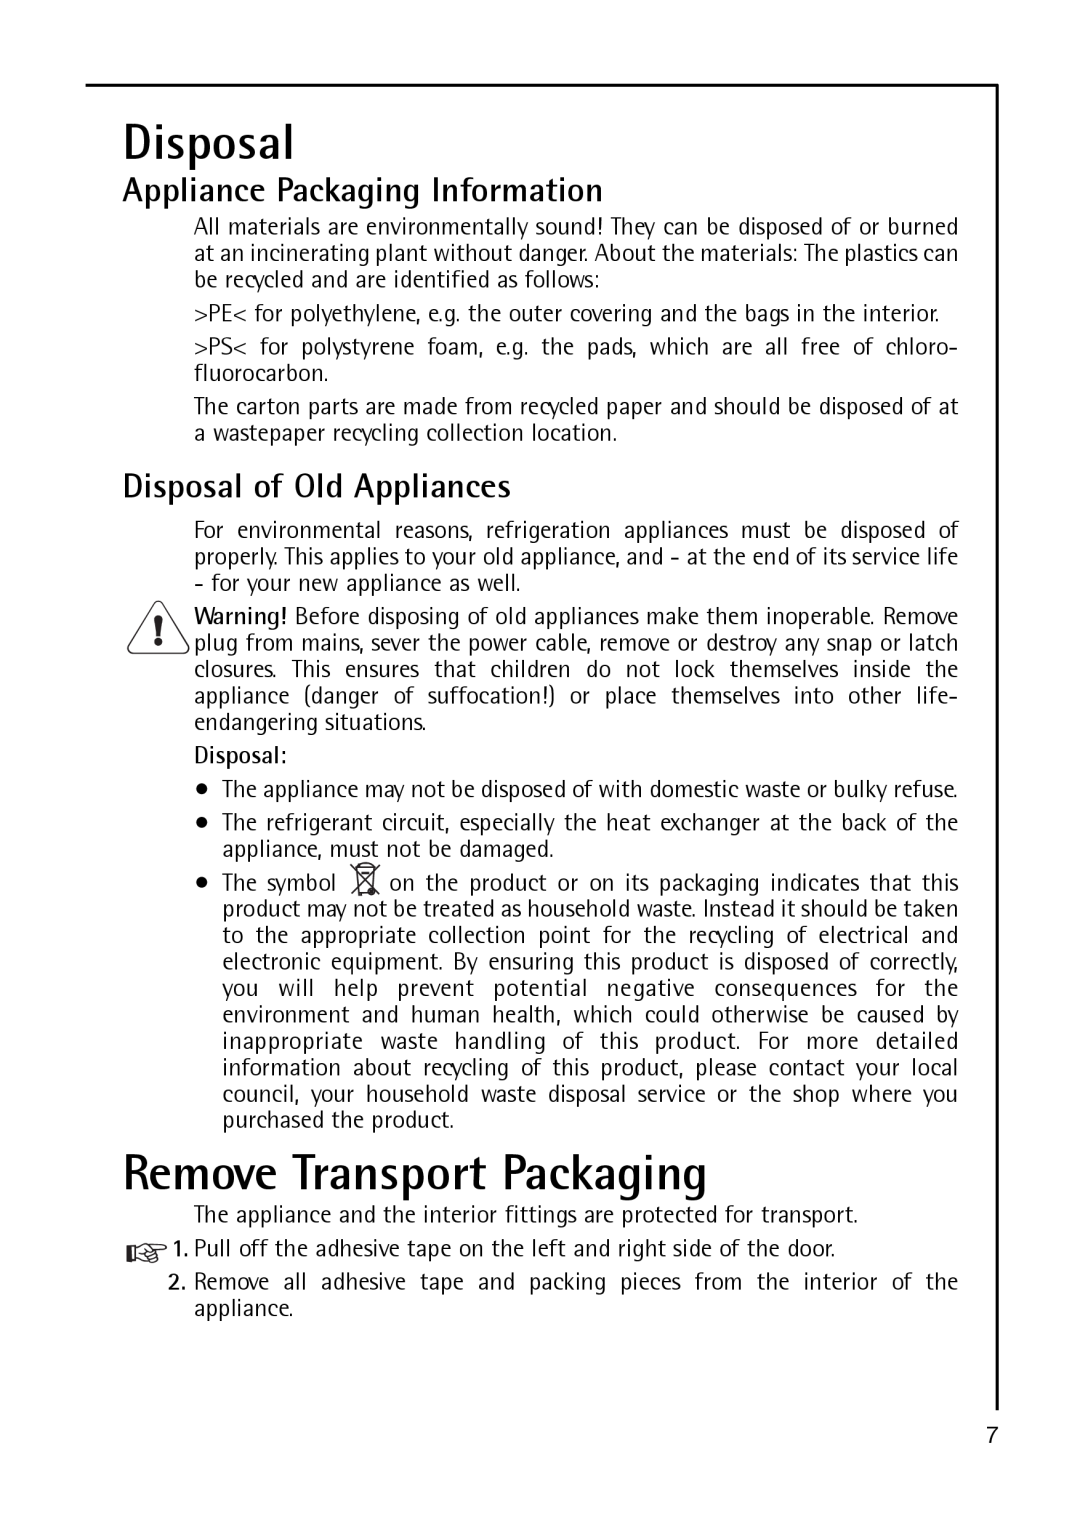 Electrolux S 70178 TK38 manual Remove Transport Packaging, Appliance Packaging Information, Disposal of Old Appliances 